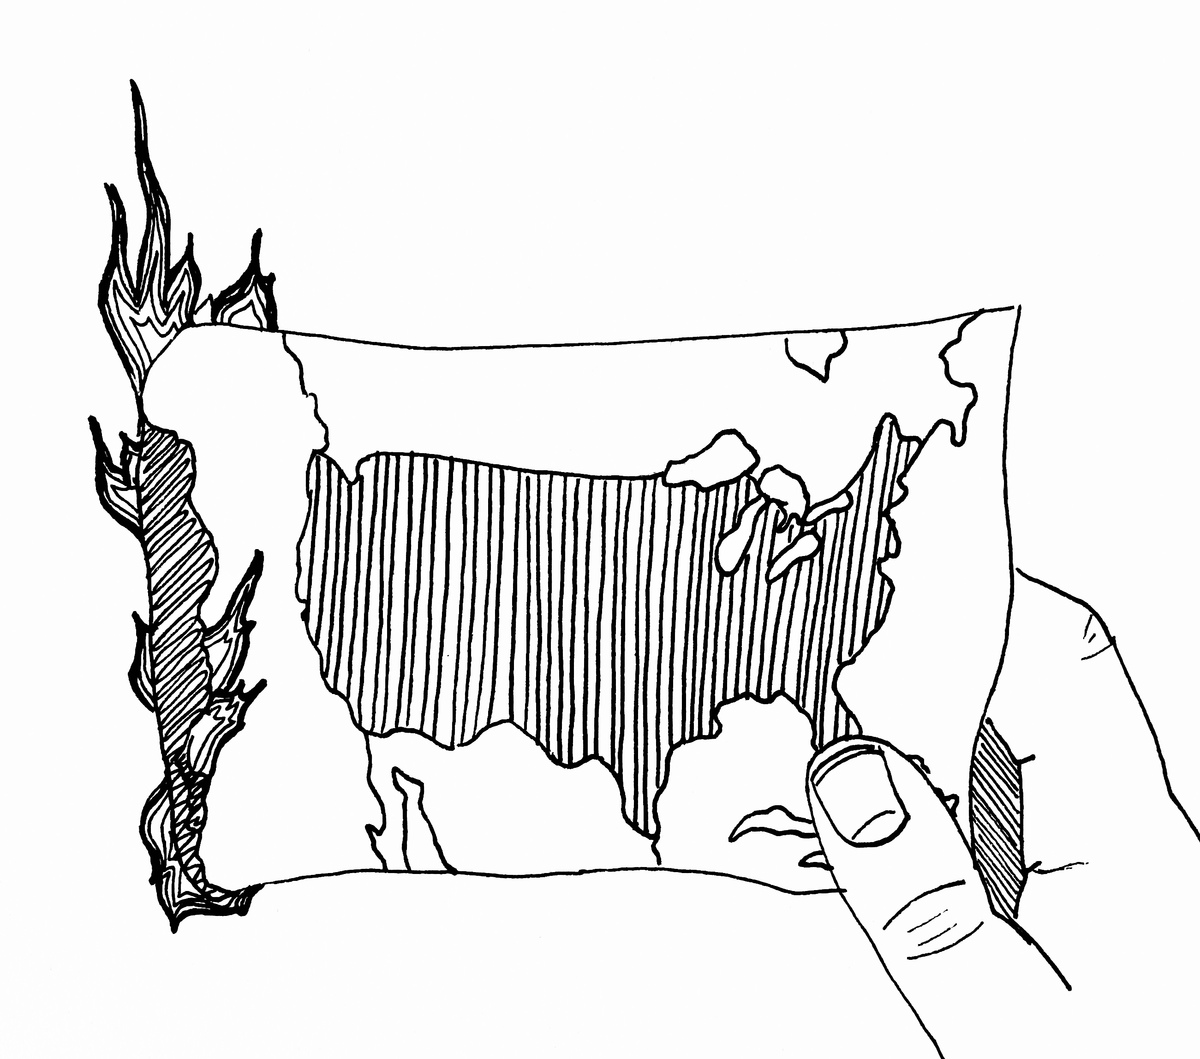 Picture of burning United States map.